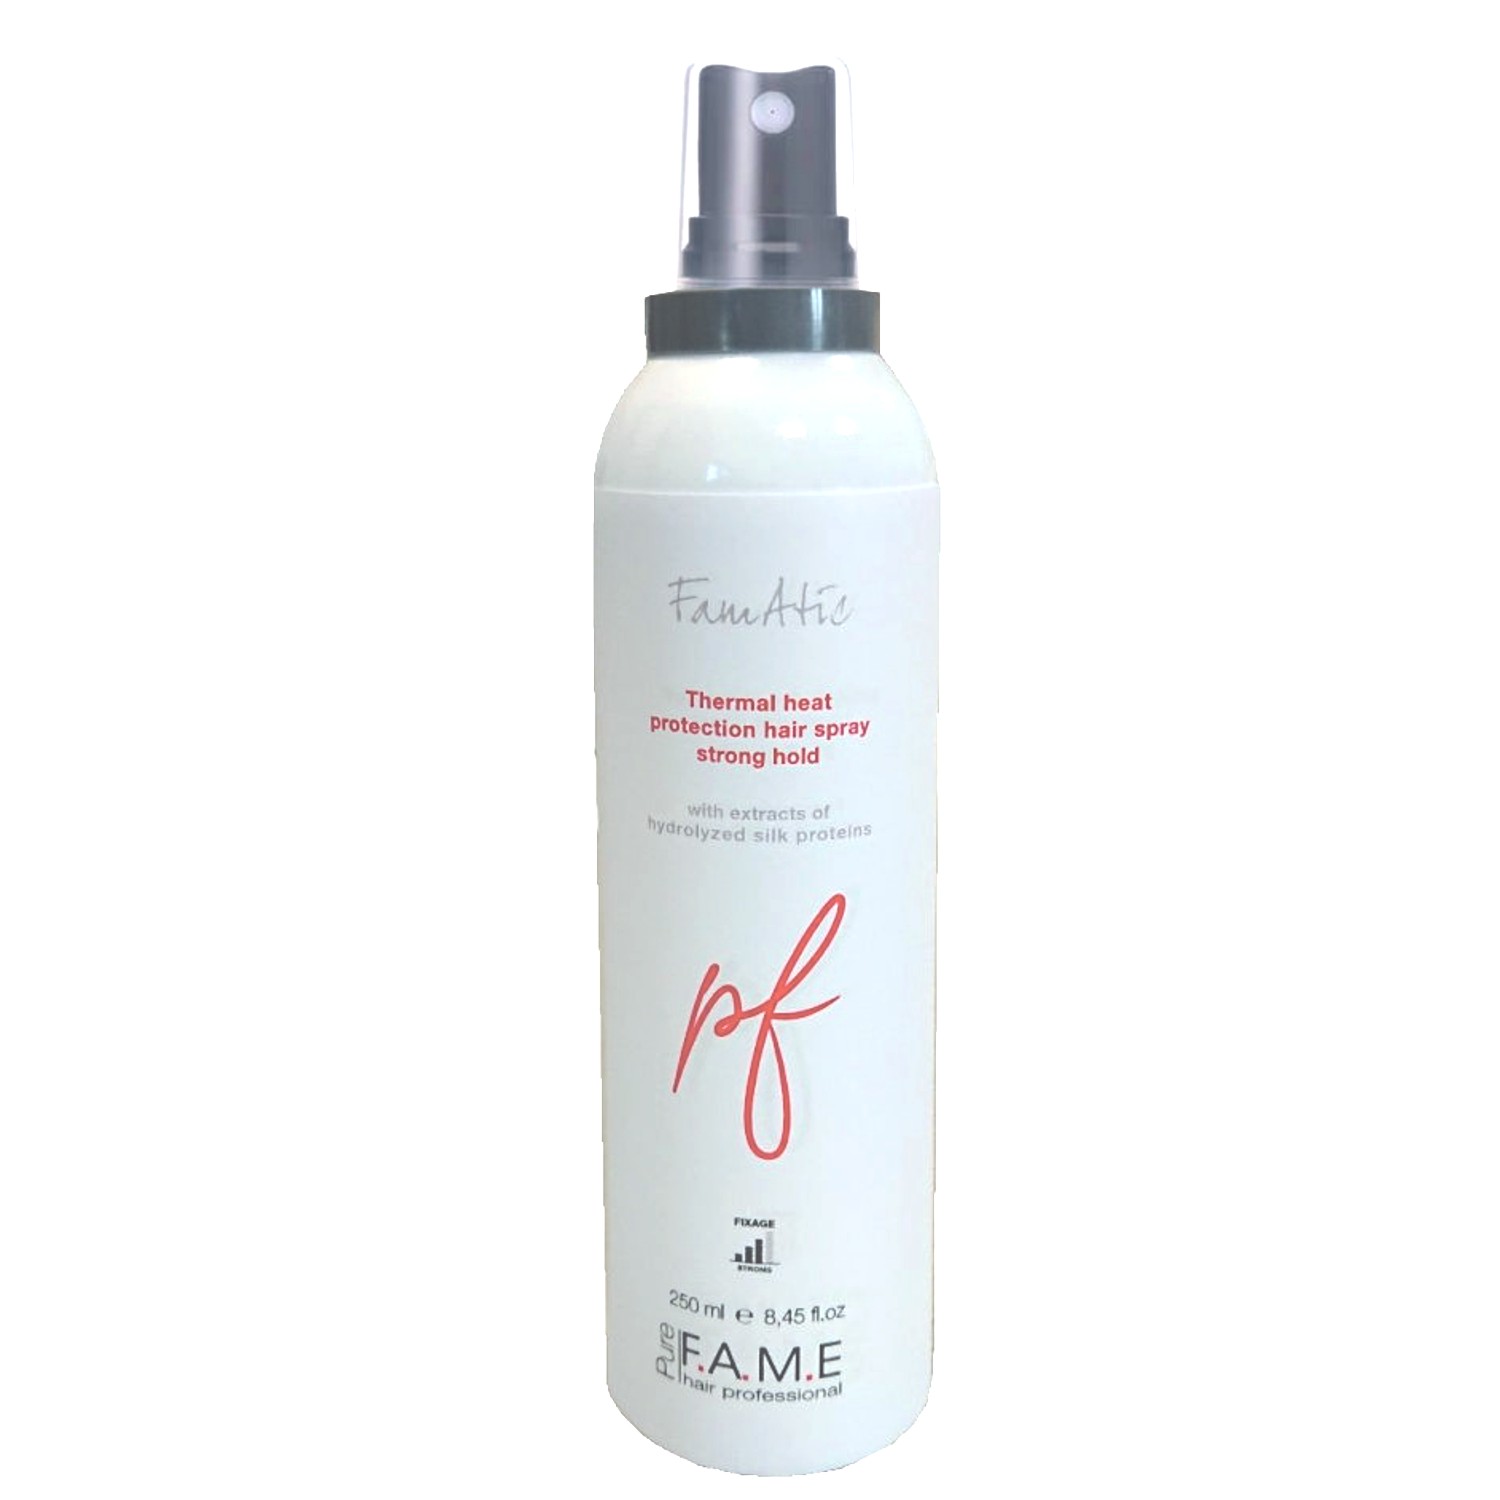 PURE FAME FamAtic Thermal Heat Protection Hair Spray 250 ml